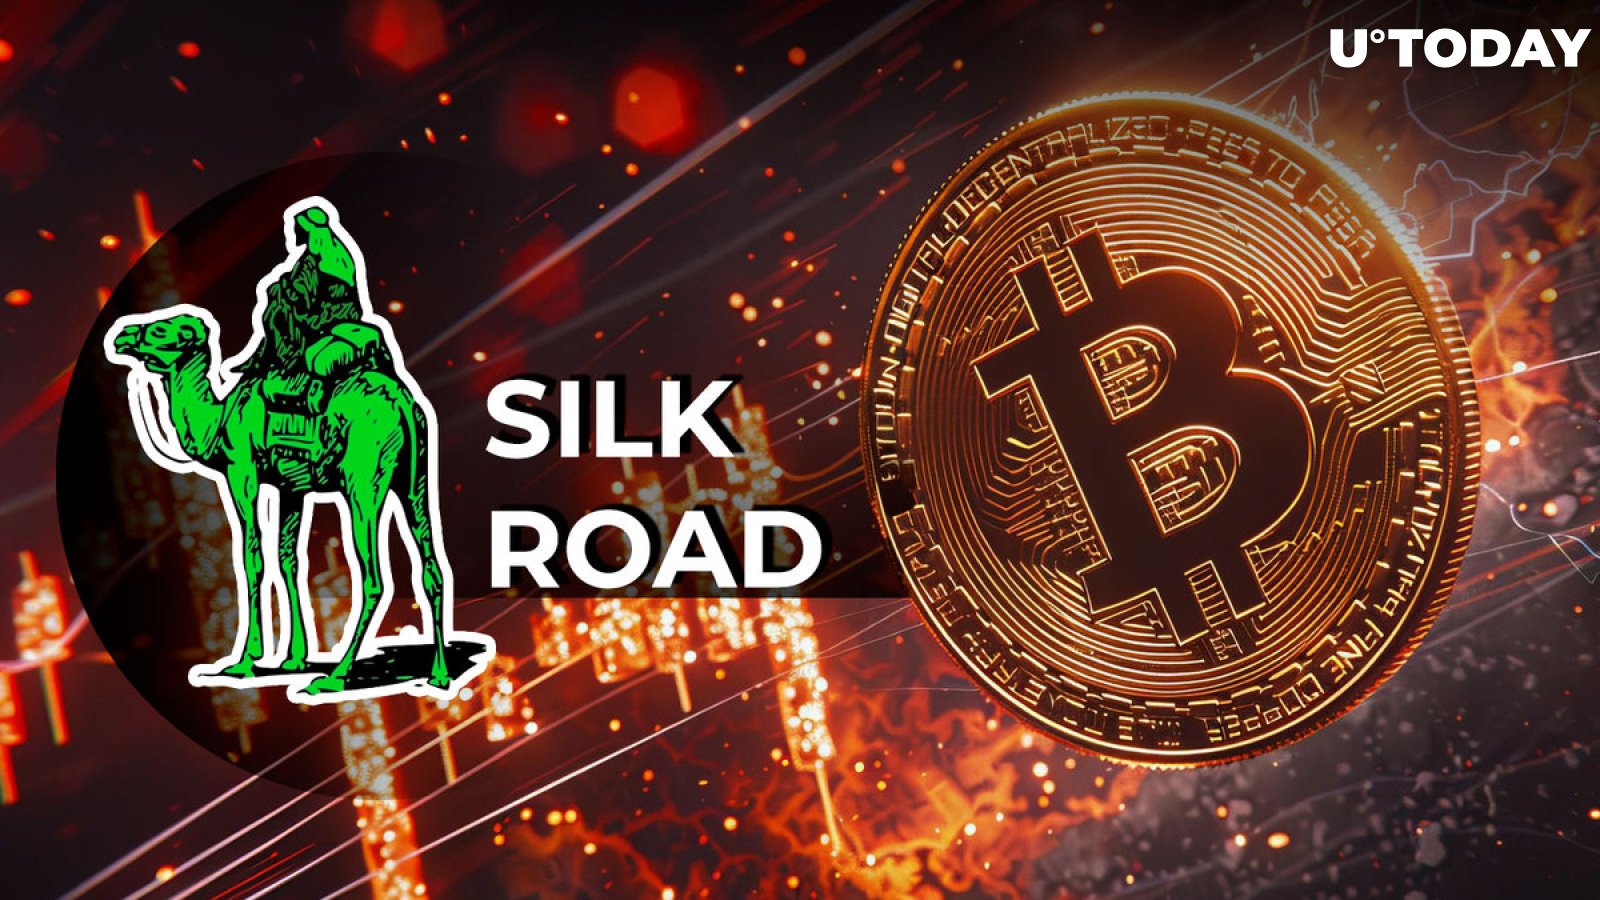 'Silk Road' Bitcoin Sent to Exchange Proclaimed 'Illegal,' Crypto Advocate Enraged